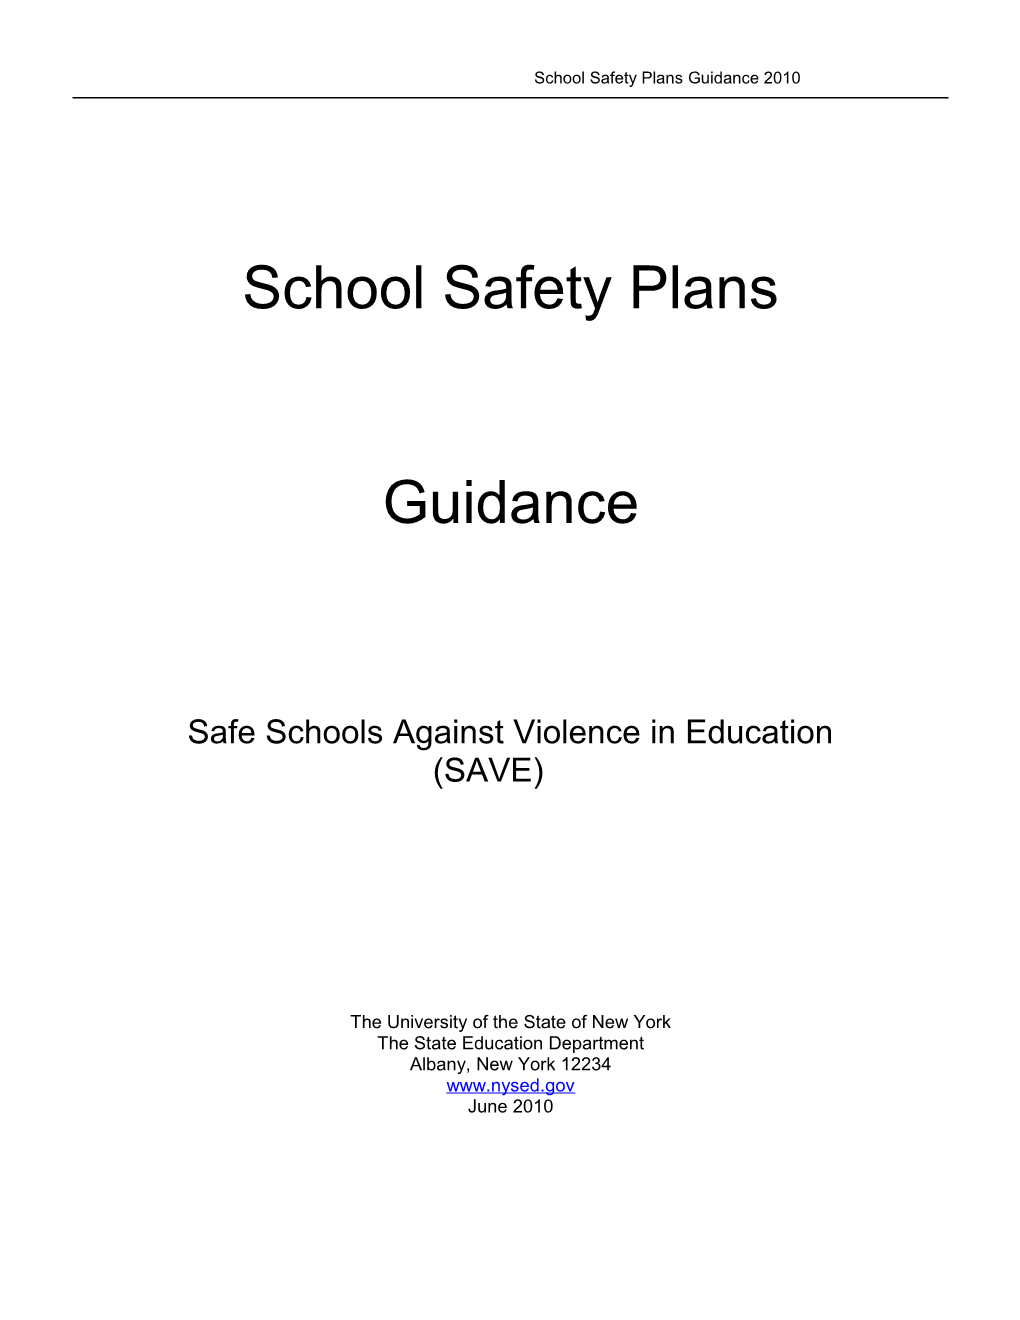 Project SAVE Guidance Document for School Safety Plans